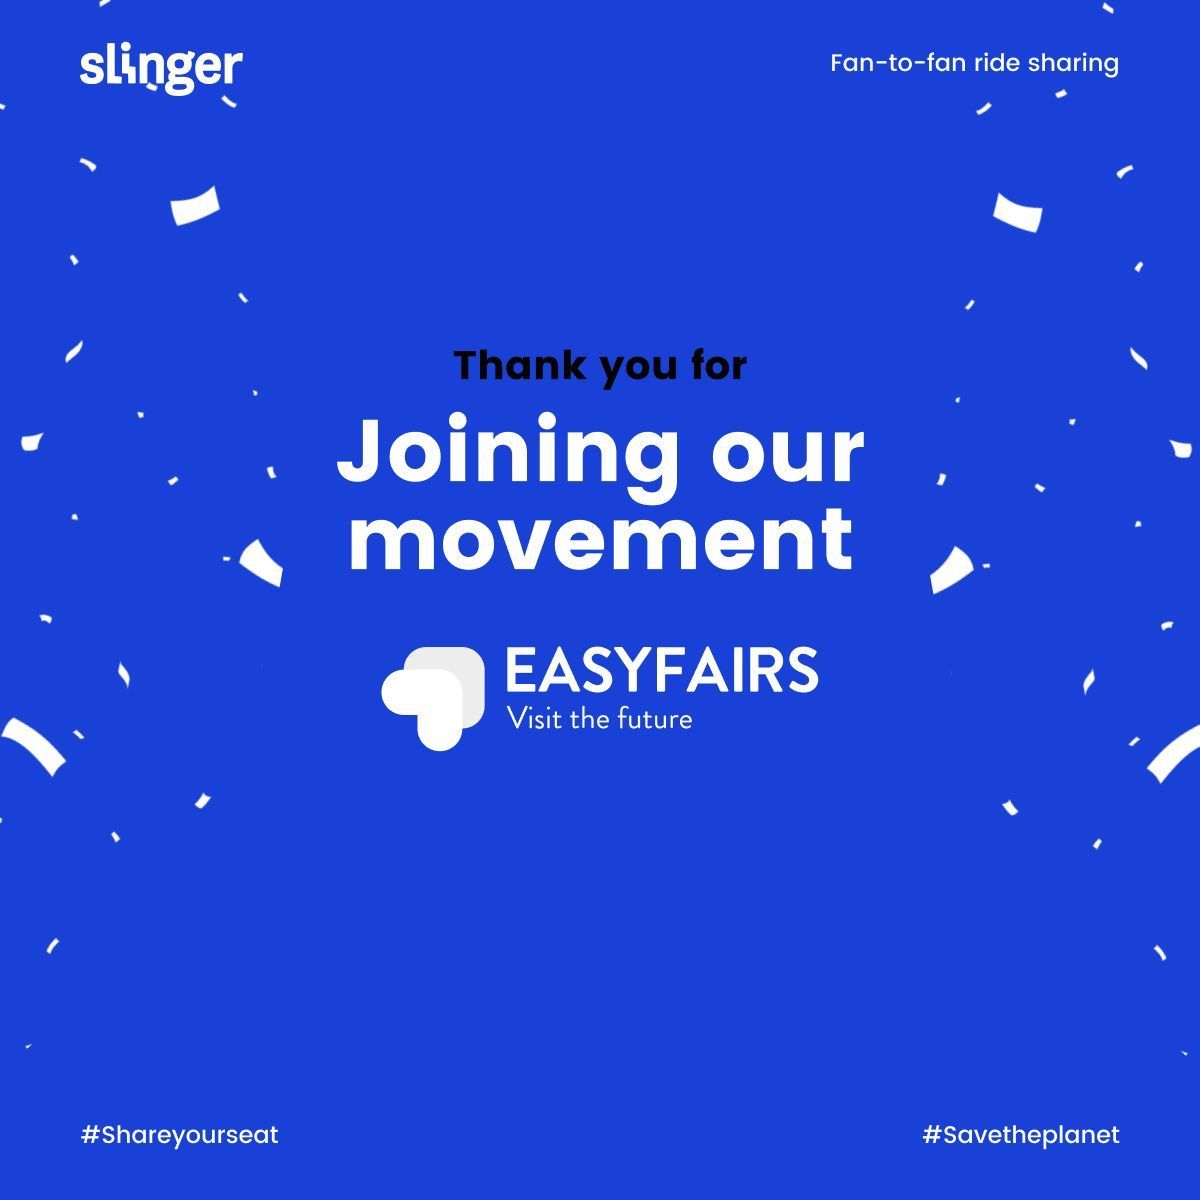 Happy to share! ✨ Our collaboration with @EasyfairsNL for Heroes Made in Asia was a hit! Users loved the easy communication and system usability. 'Super good communication,' said one user, I even found a new shared interest with my travel companions :)' #Slinger #Easyfairs